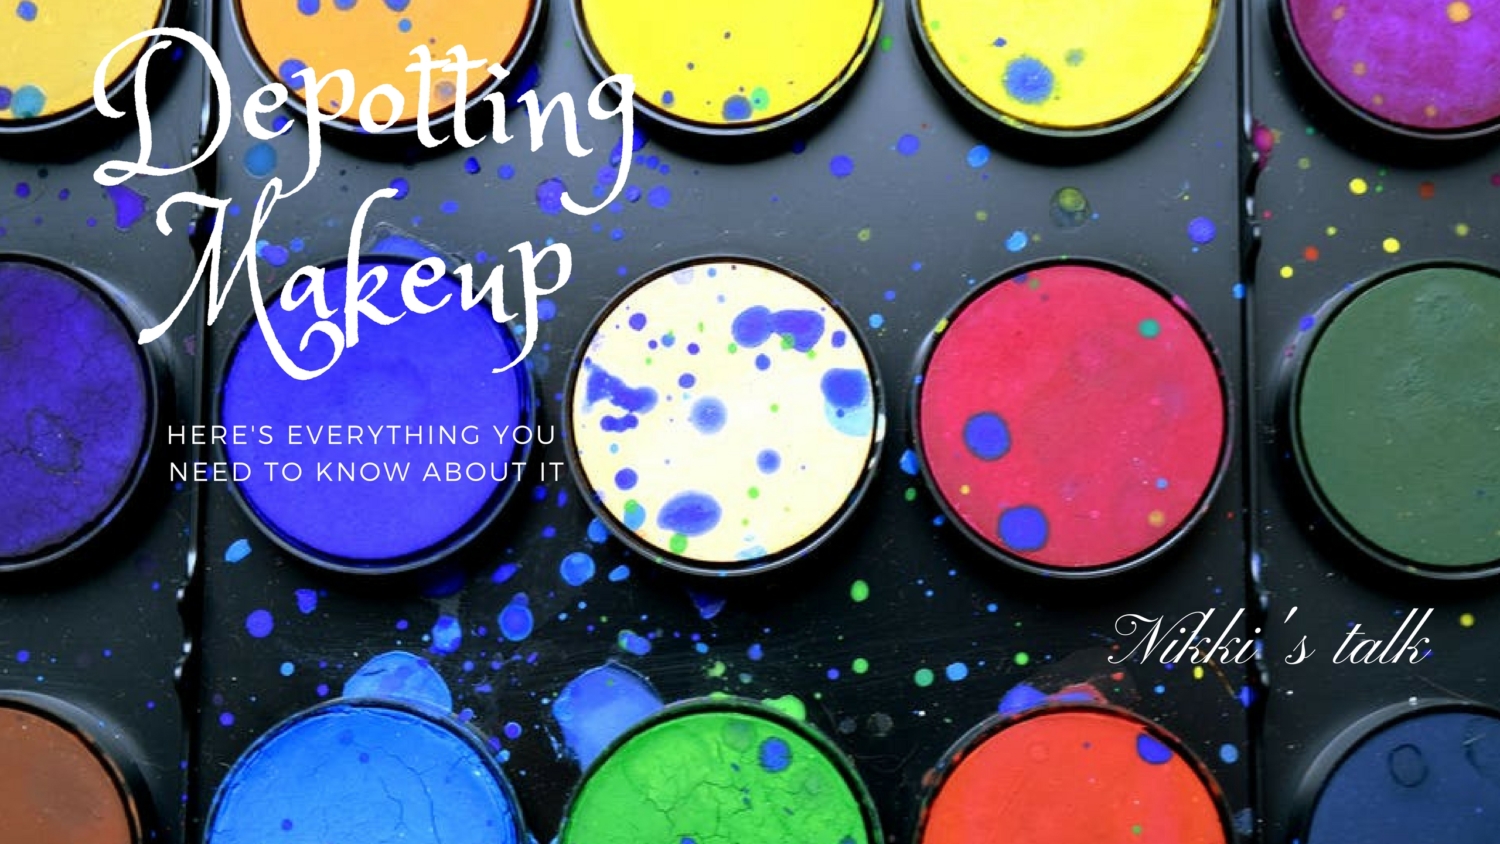 Ever heard of depotting Makeup?Here's all you need to know - Nikki's talk